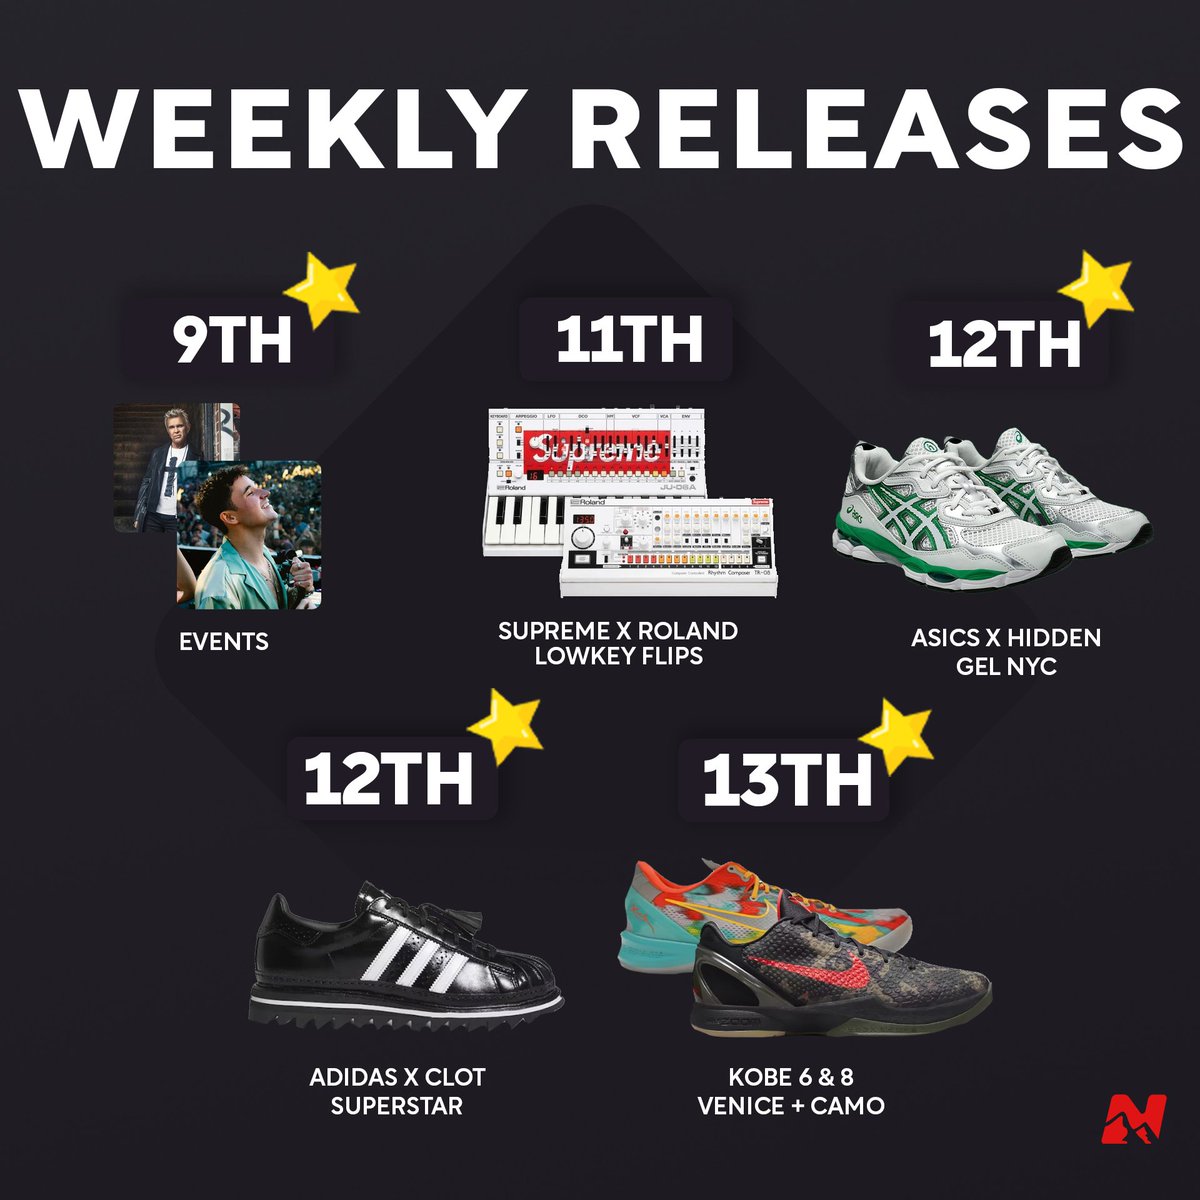 Your Weekly Releases are here! Kobes are the highlight of the week - Which ones are you copping? Secure your profits with TheNorthCop!